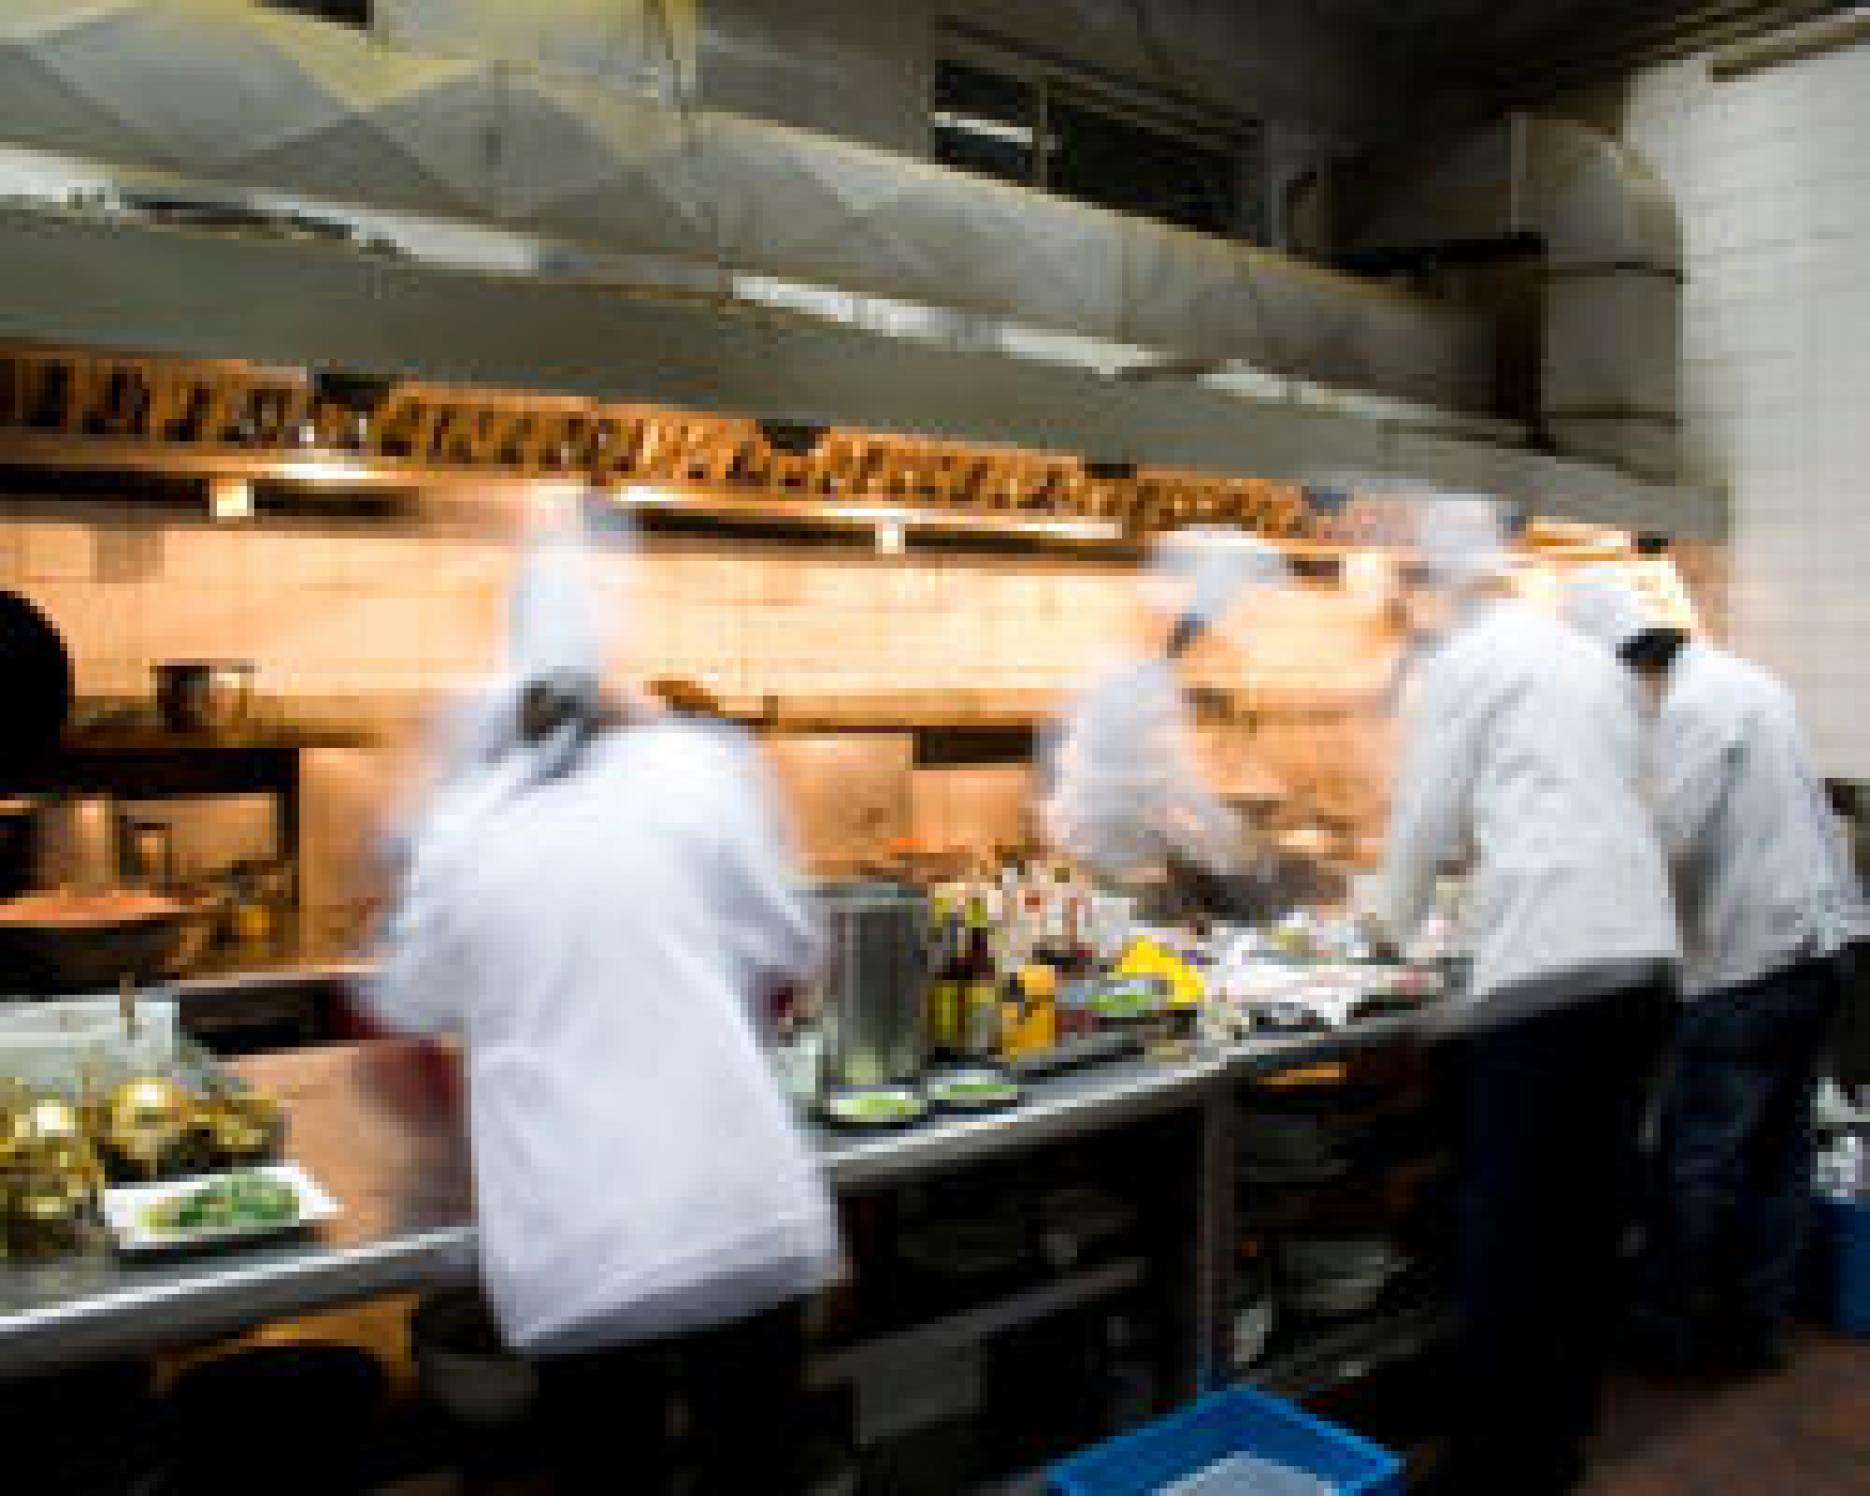 picture of chefs, busy in the kitchen